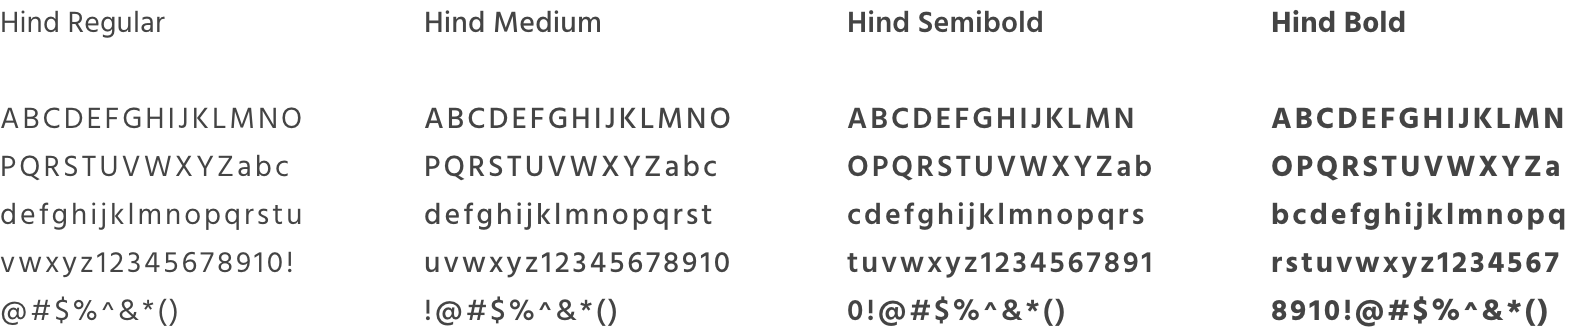 Hind font in regular, medium, semibold and bold font weights